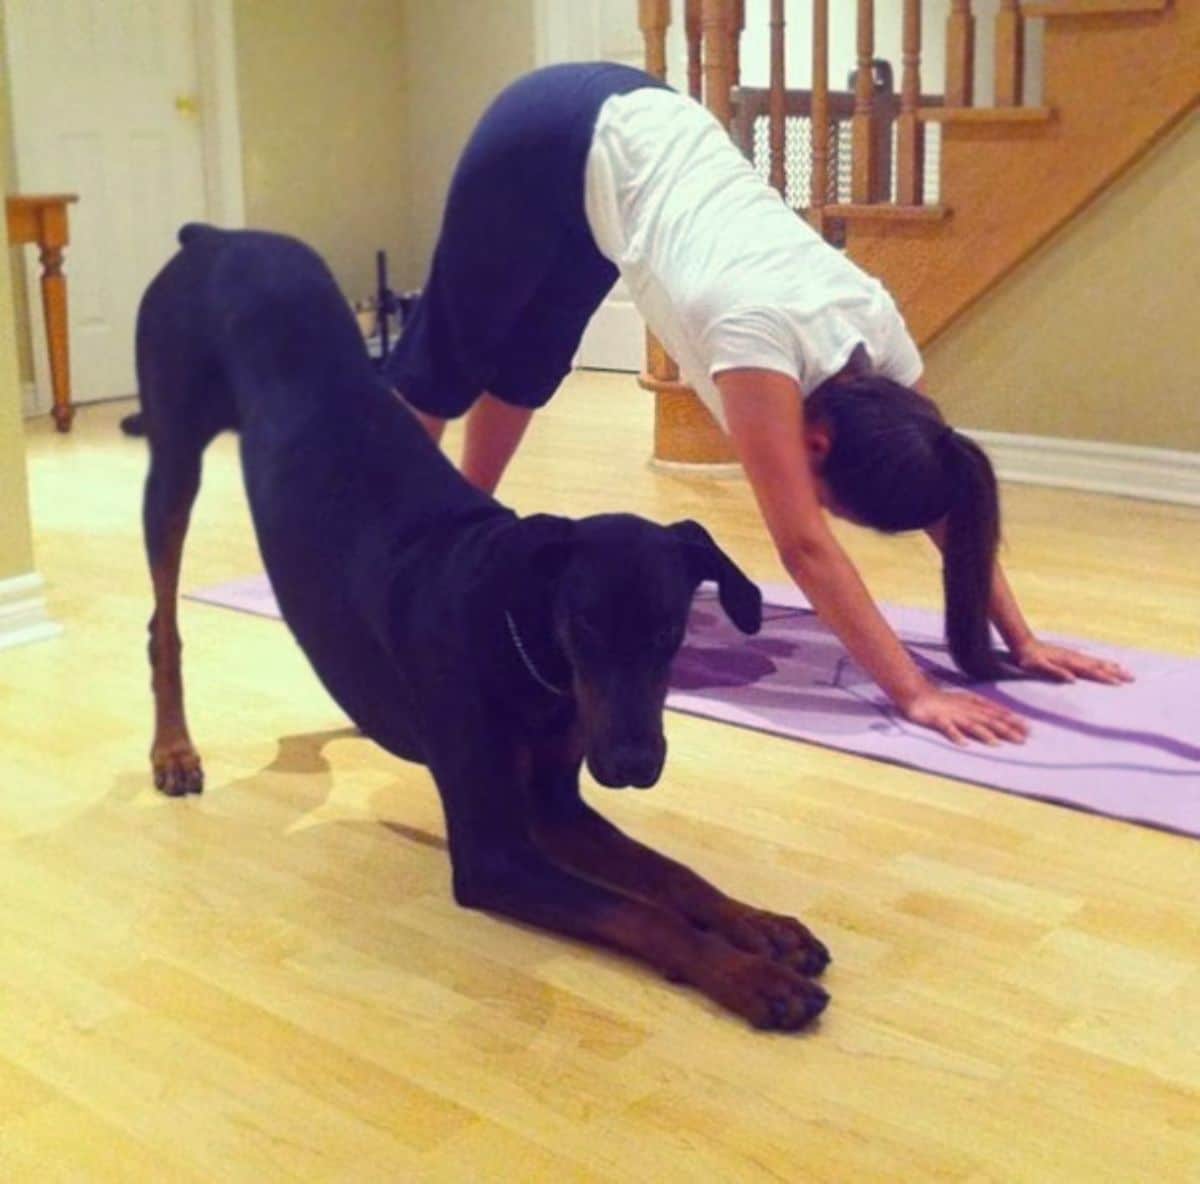 woman doing an inverted v yoga position on a yoga mat and a black and brown doberman imitating her next to her